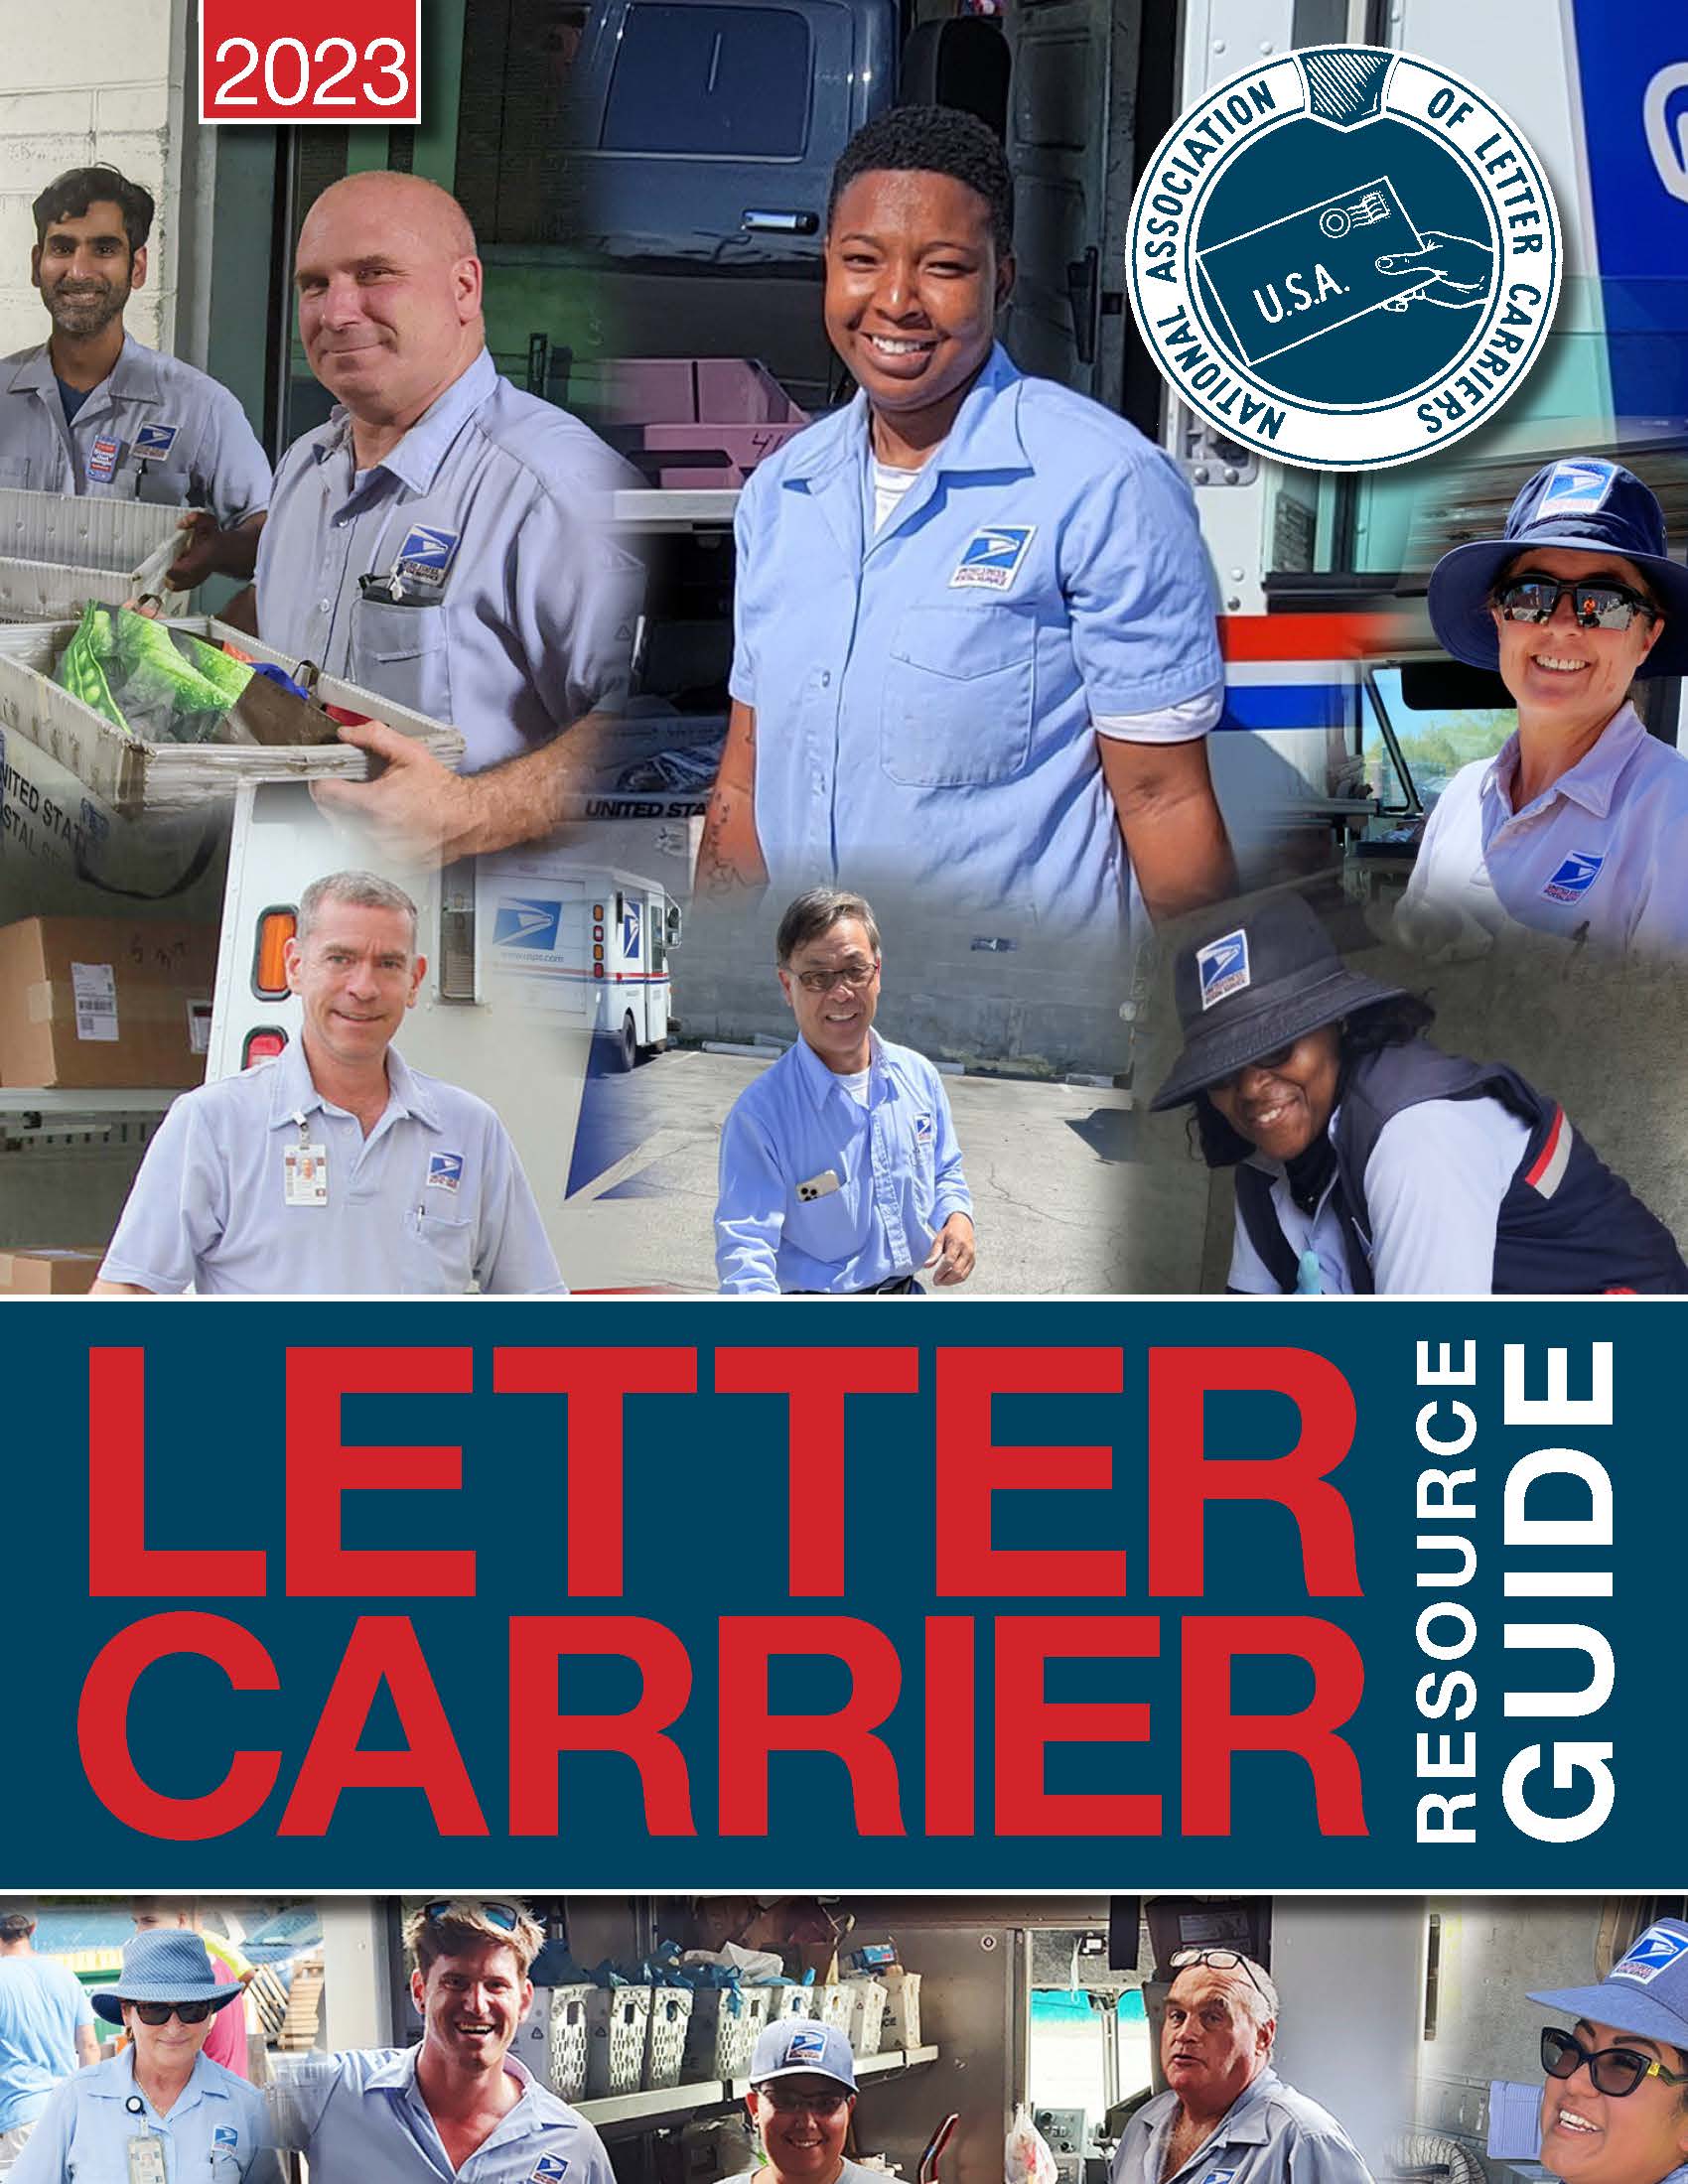 2023 Letter Carriers Resource Guide Cover. Smiling letter carriers in USPS uniforms. National Association of Letter Carriers logo